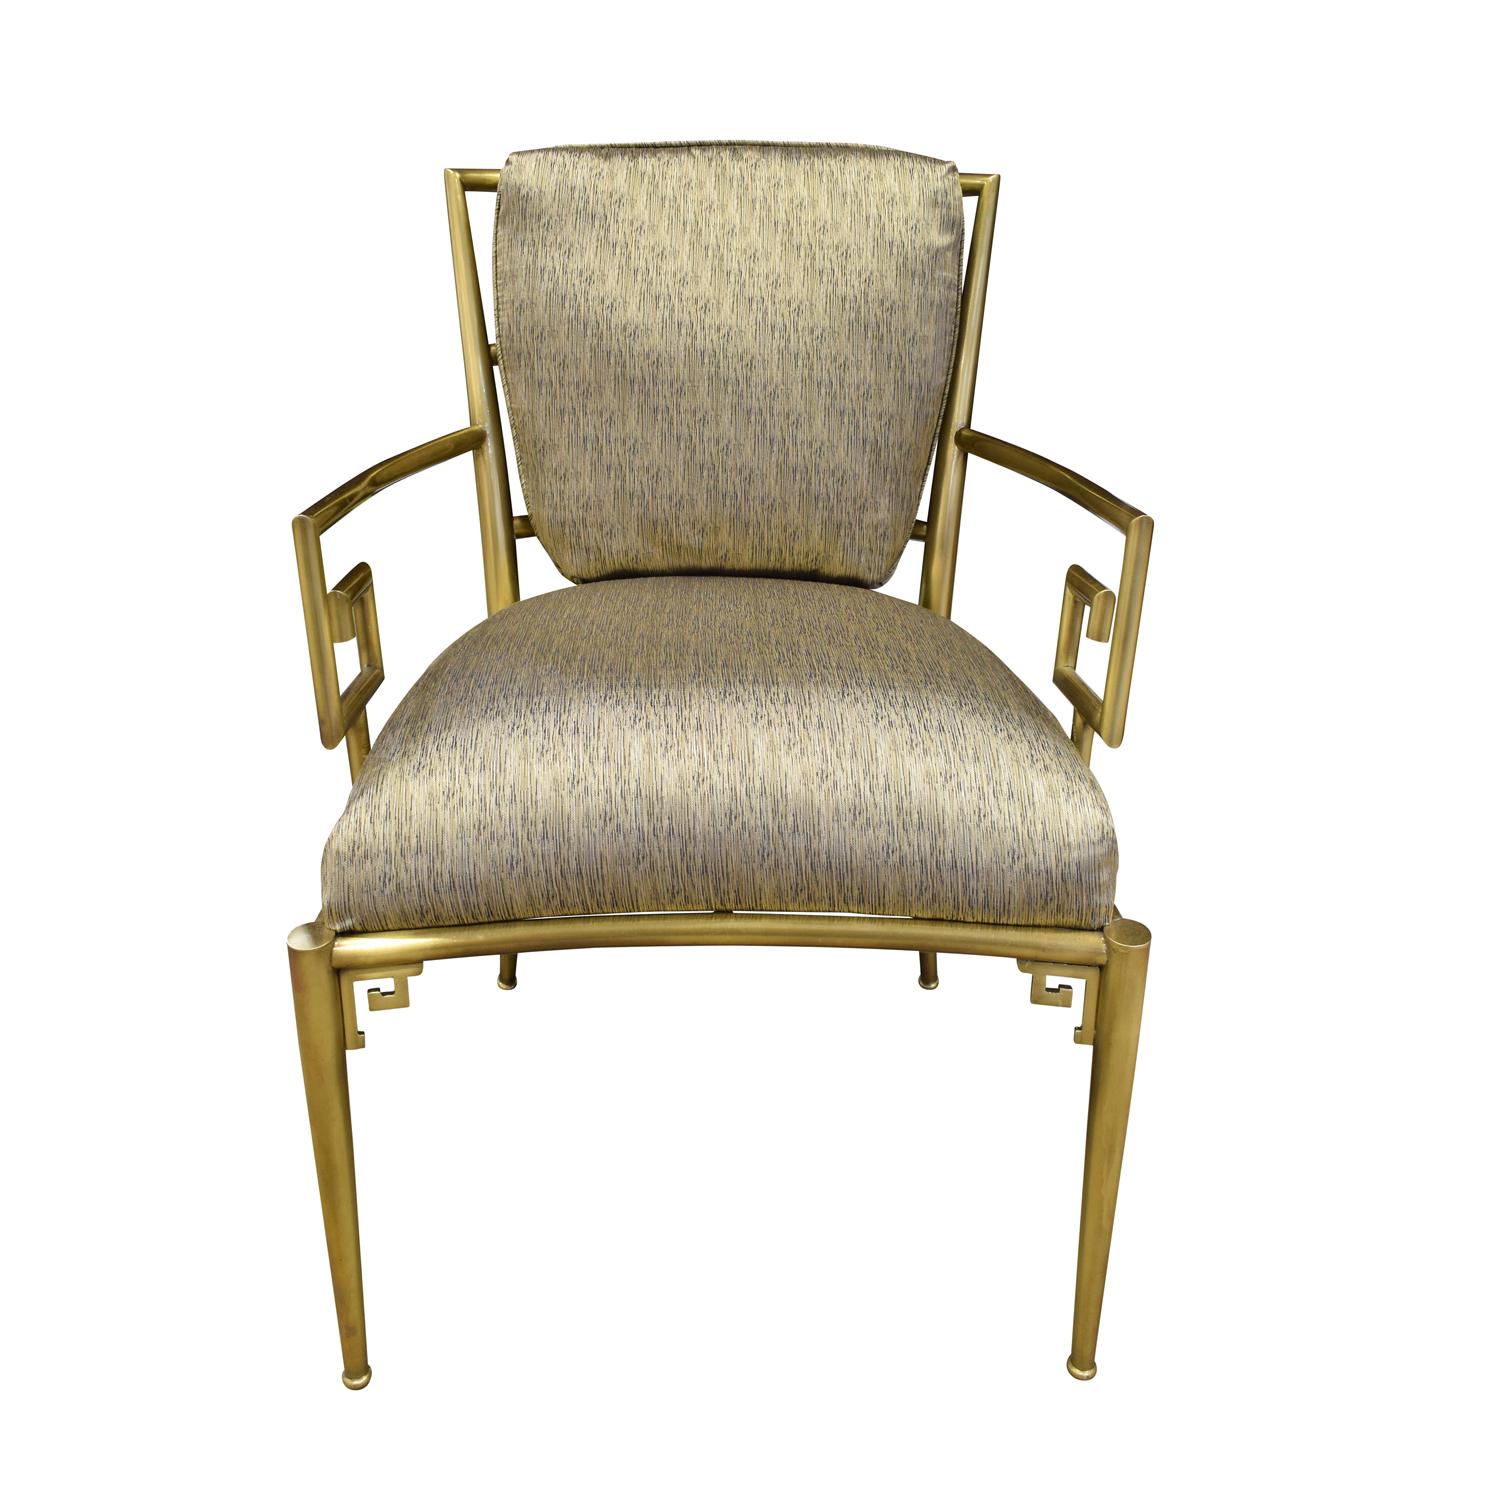 Pair of Greek Key lounge chairs in brass with upholstered seats and backs by Mastercraft, American 1960s. These chairs are beautifully crafted.